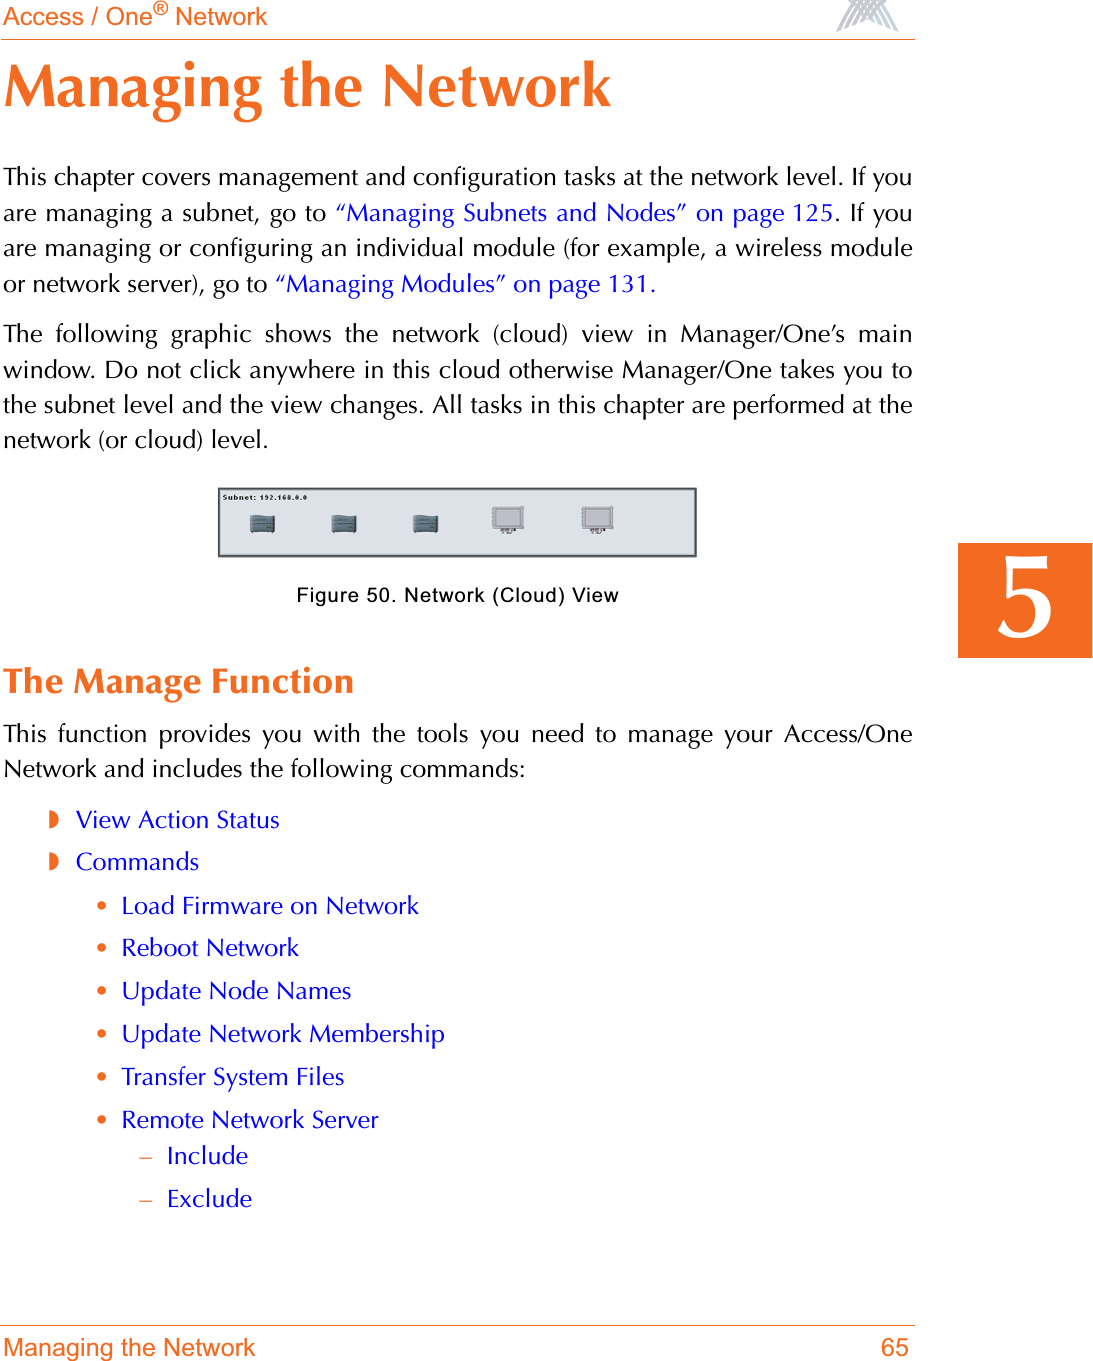 Access / One® NetworkManaging the Network 655Managing the NetworkThis chapter covers management and configuration tasks at the network level. If youare managing a subnet, go to “Managing Subnets and Nodes” on page 125. If youare managing or configuring an individual module (for example, a wireless moduleor network server), go to “Managing Modules” on page 131.The following graphic shows the network (cloud) view in Manager/One’s mainwindow. Do not click anywhere in this cloud otherwise Manager/One takes you tothe subnet level and the view changes. All tasks in this chapter are performed at thenetwork (or cloud) level.Figure 50. Network (Cloud) ViewThe Manage FunctionThis function provides you with the tools you need to manage your Access/OneNetwork and includes the following commands:◗View Action Status◗Commands•Load Firmware on Network•Reboot Network•Update Node Names•Update Network Membership•Transfer System Files•Remote Network Server–Include–Exclude